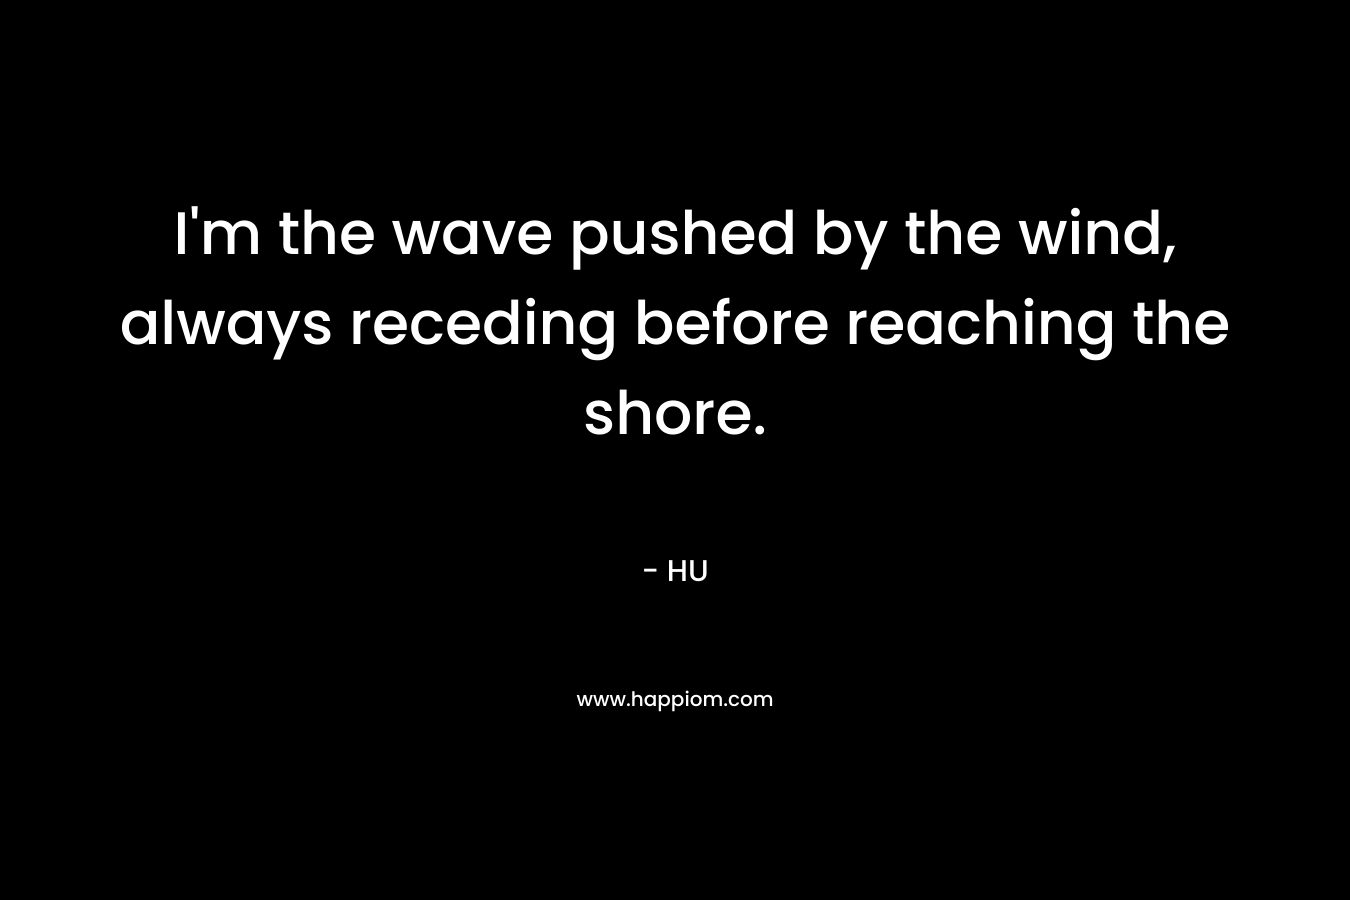 I’m the wave pushed by the wind, always receding before reaching the shore. – HU